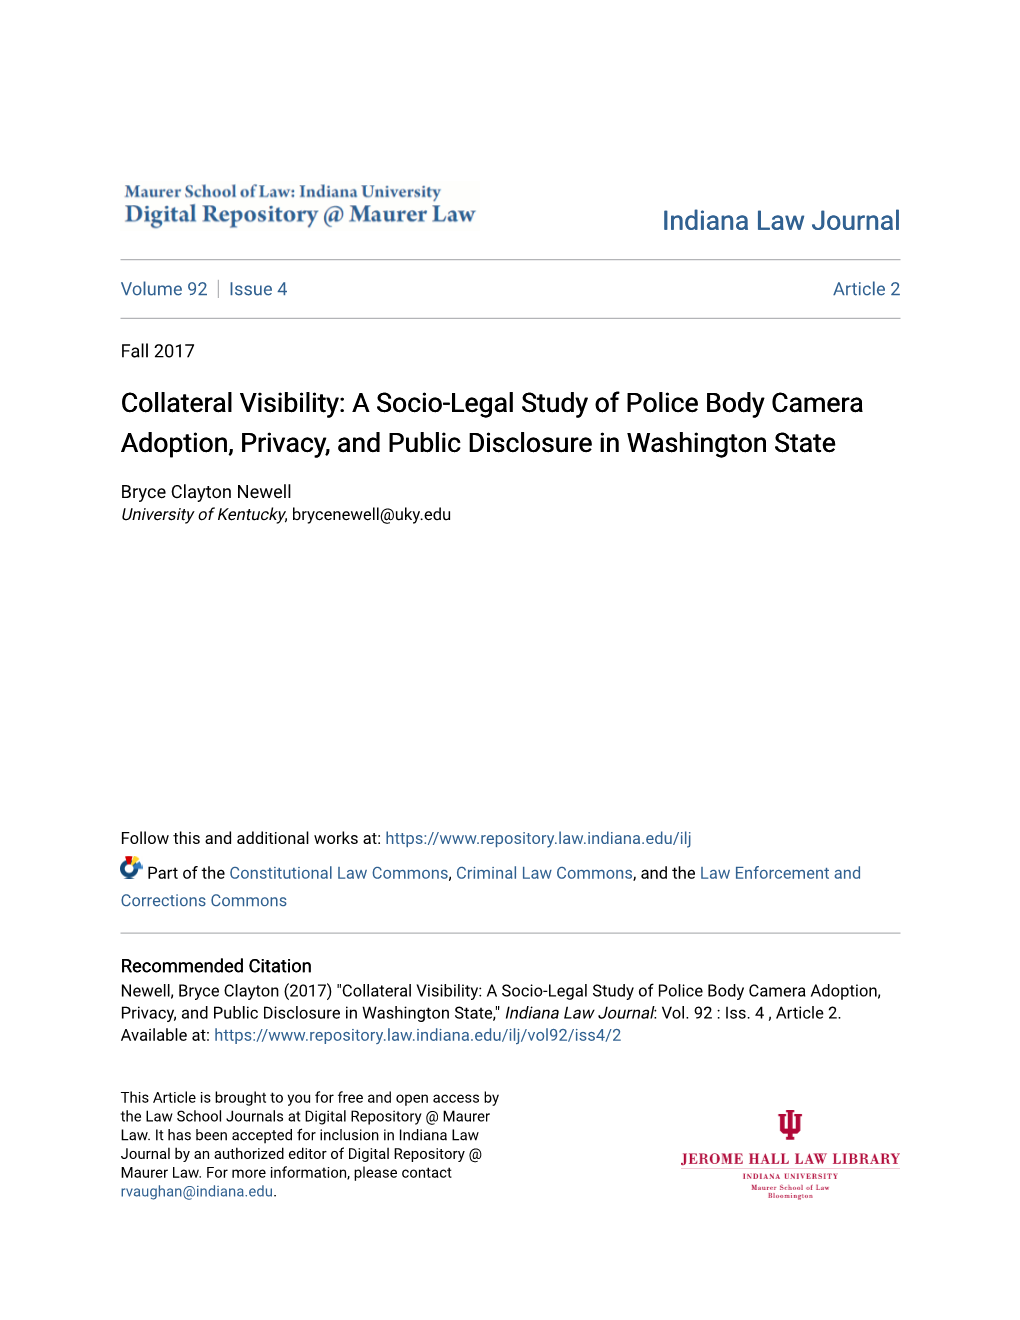 A Socio-Legal Study of Police Body Camera Adoption, Privacy, and Public Disclosure in Washington State